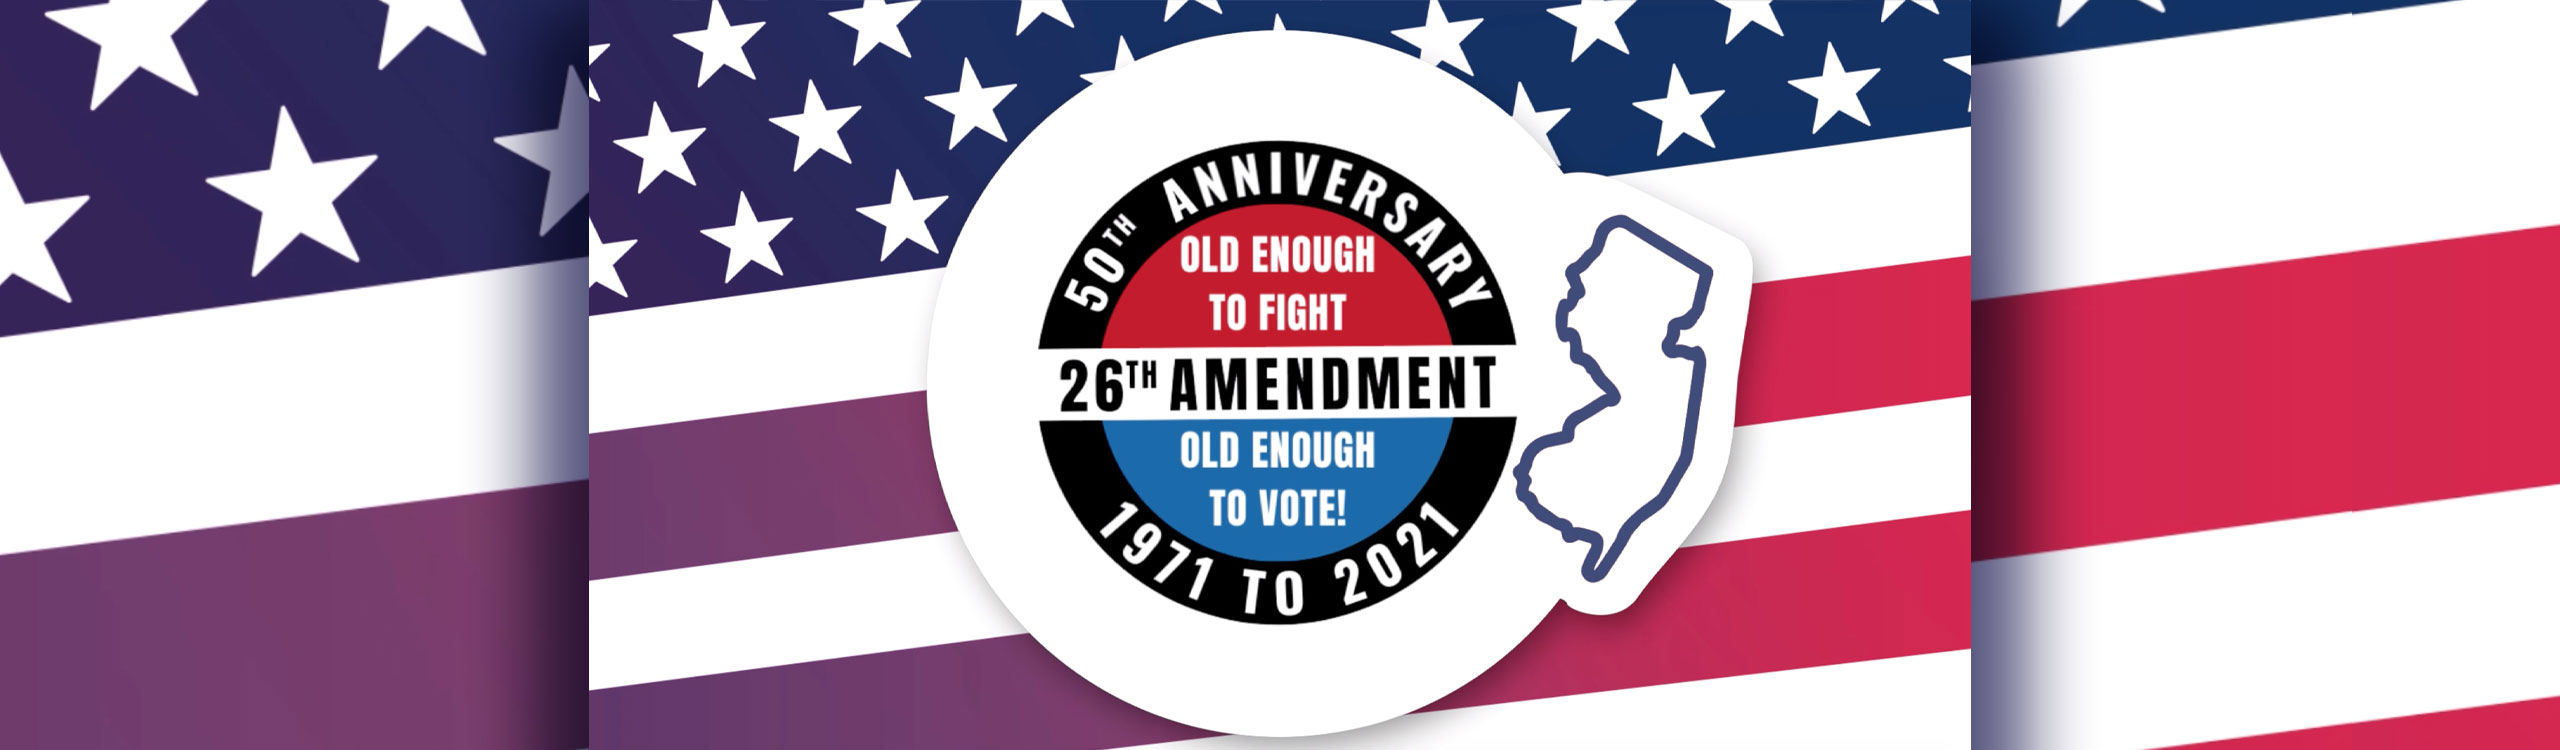 50th Anniversary of the 26th Amendment Logo on a flag based background